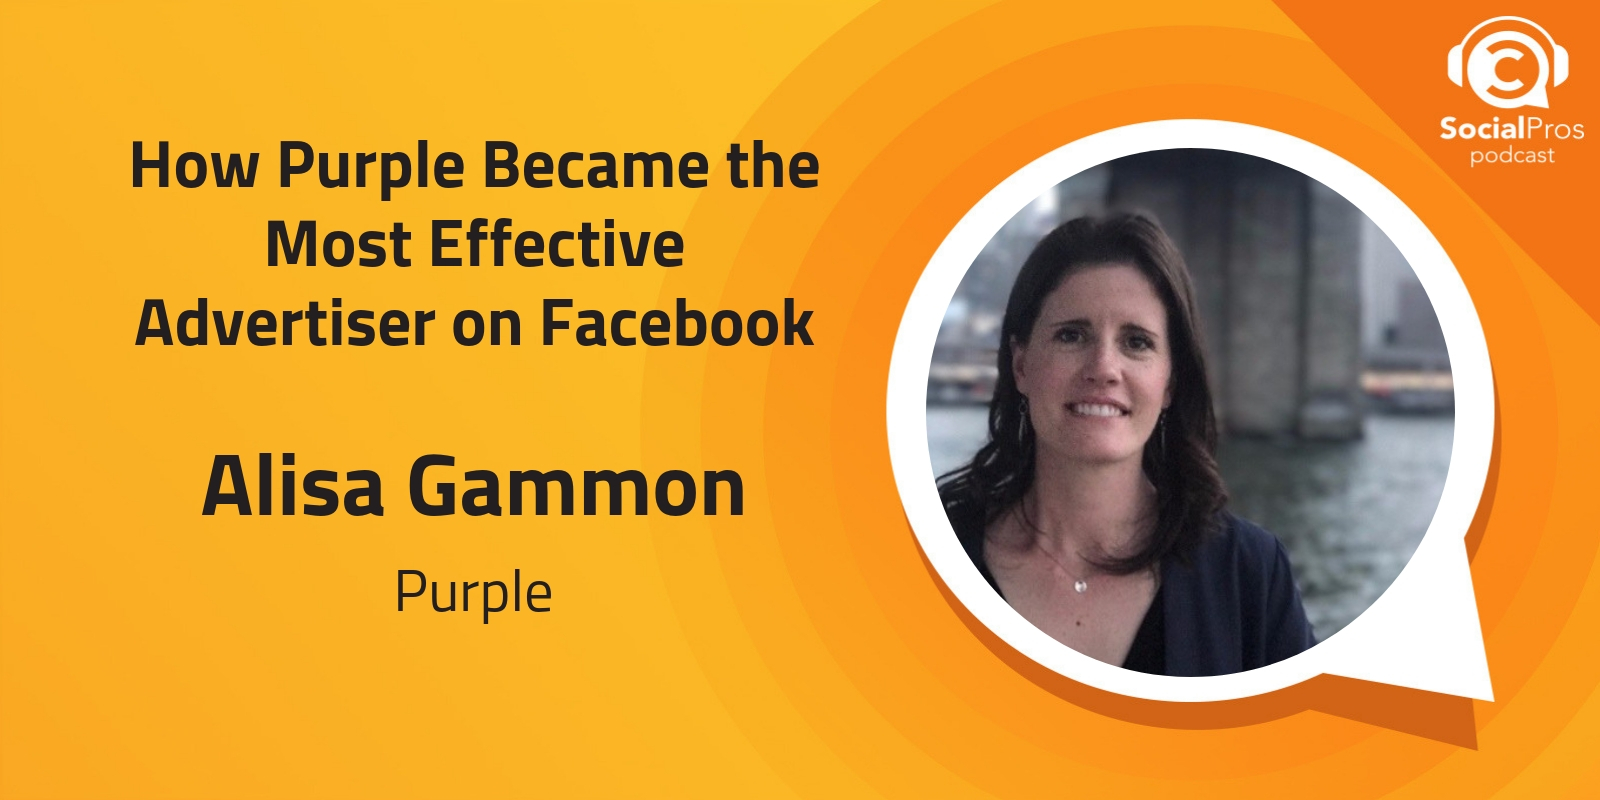 How Purple Became the Most Effective Advertiser on Facebook